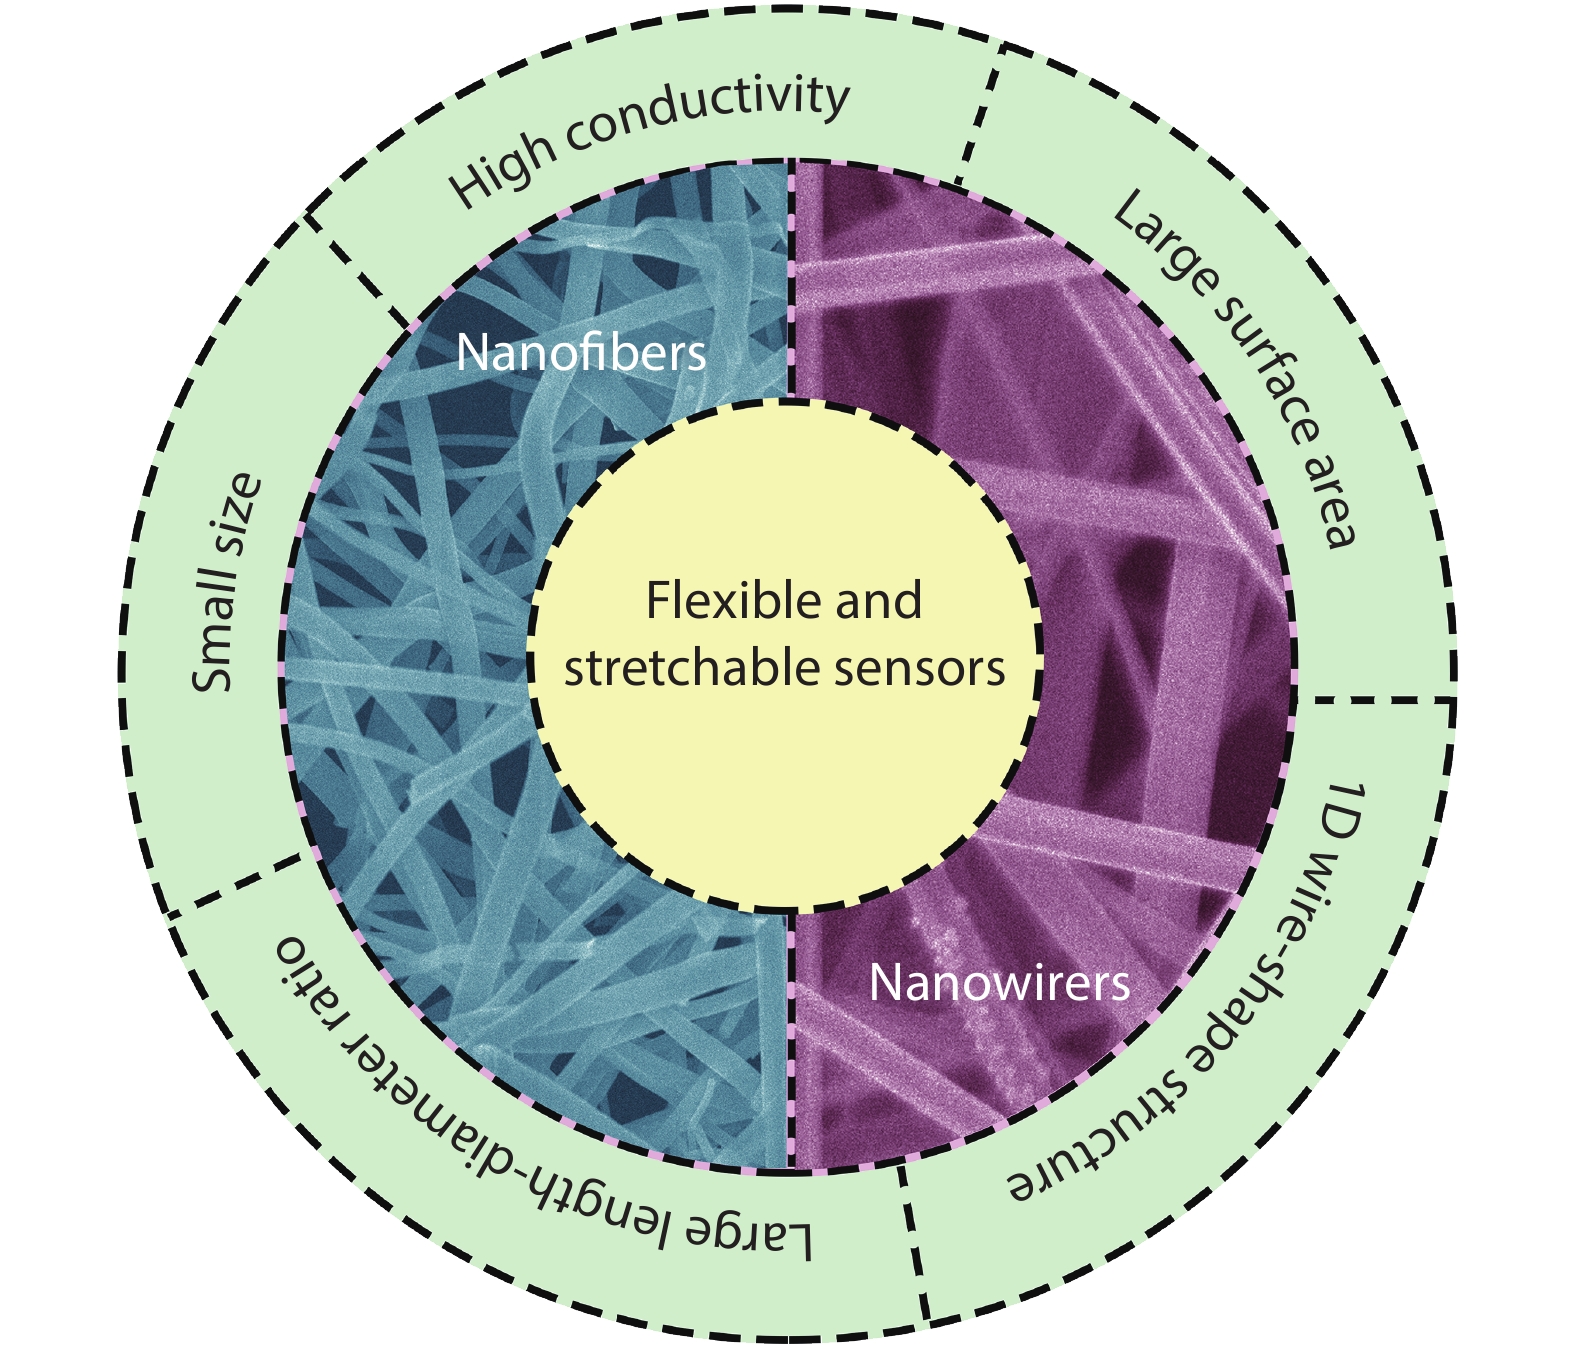 (Color online) Schematic of nanofibers/nanowires-based flexible and stretchable sensors.